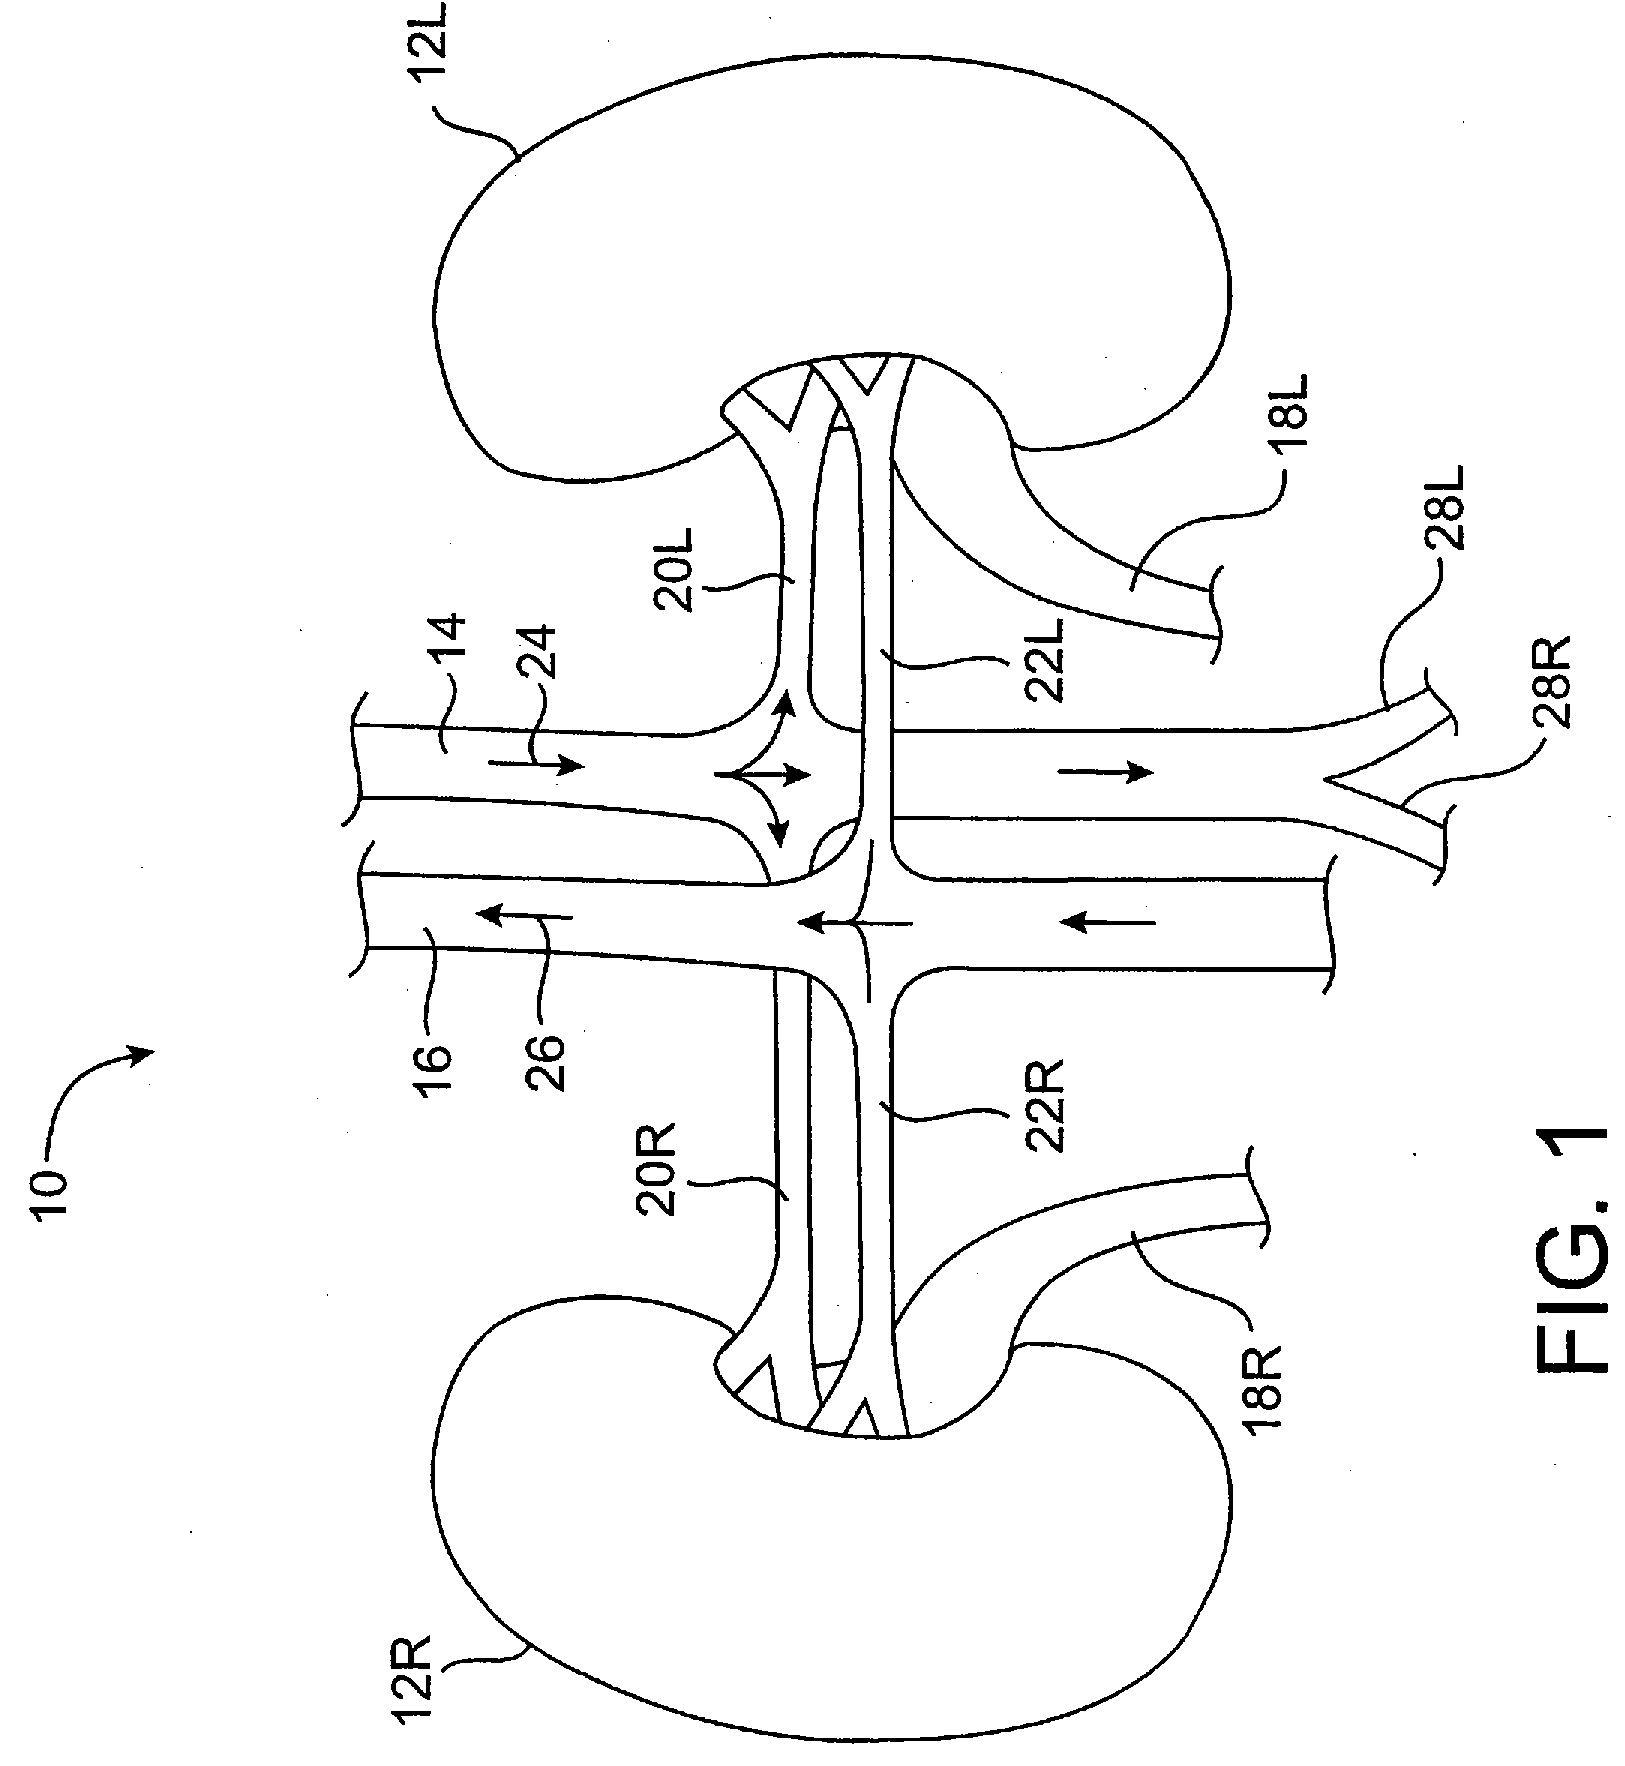 Systems and methods for controlling renovascular perfusion